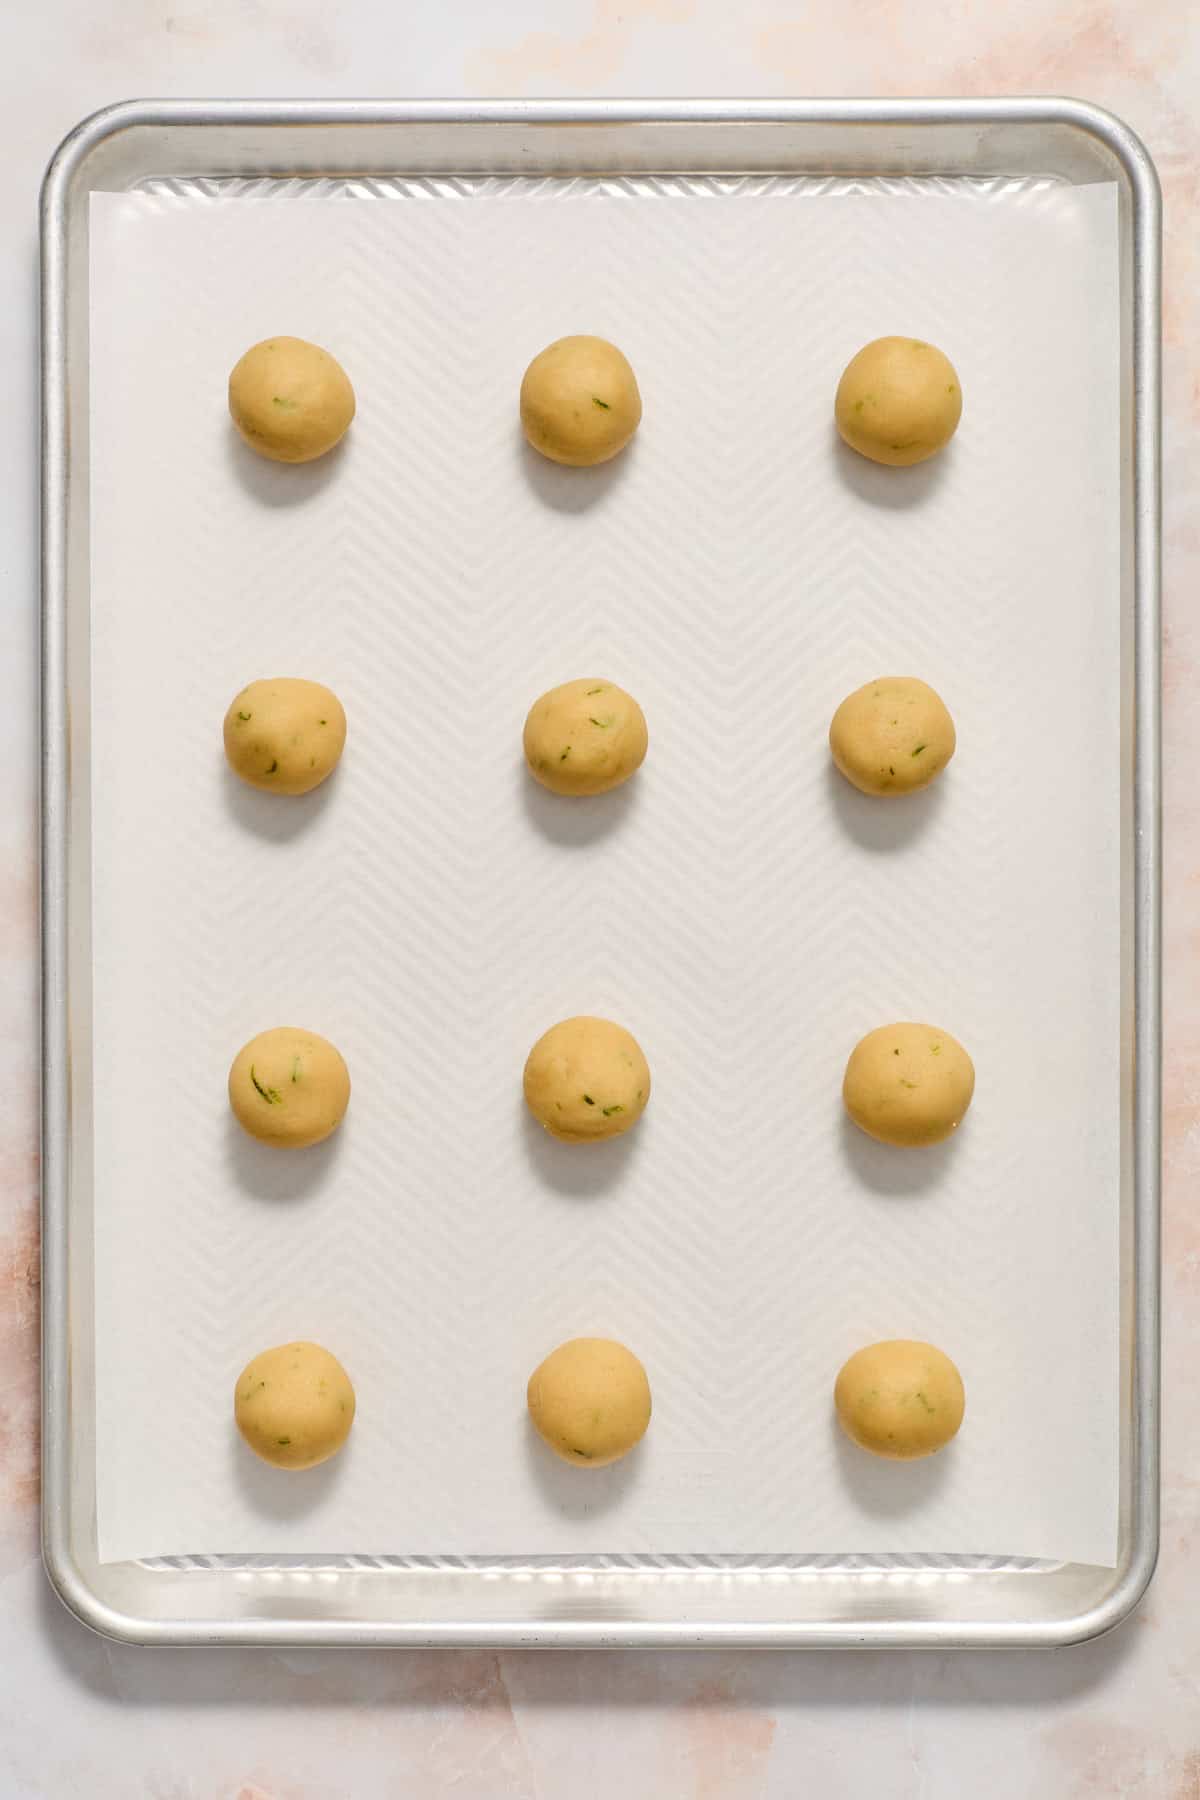 Key lime cookie dough rolled into balls on parchment lined baking sheet.